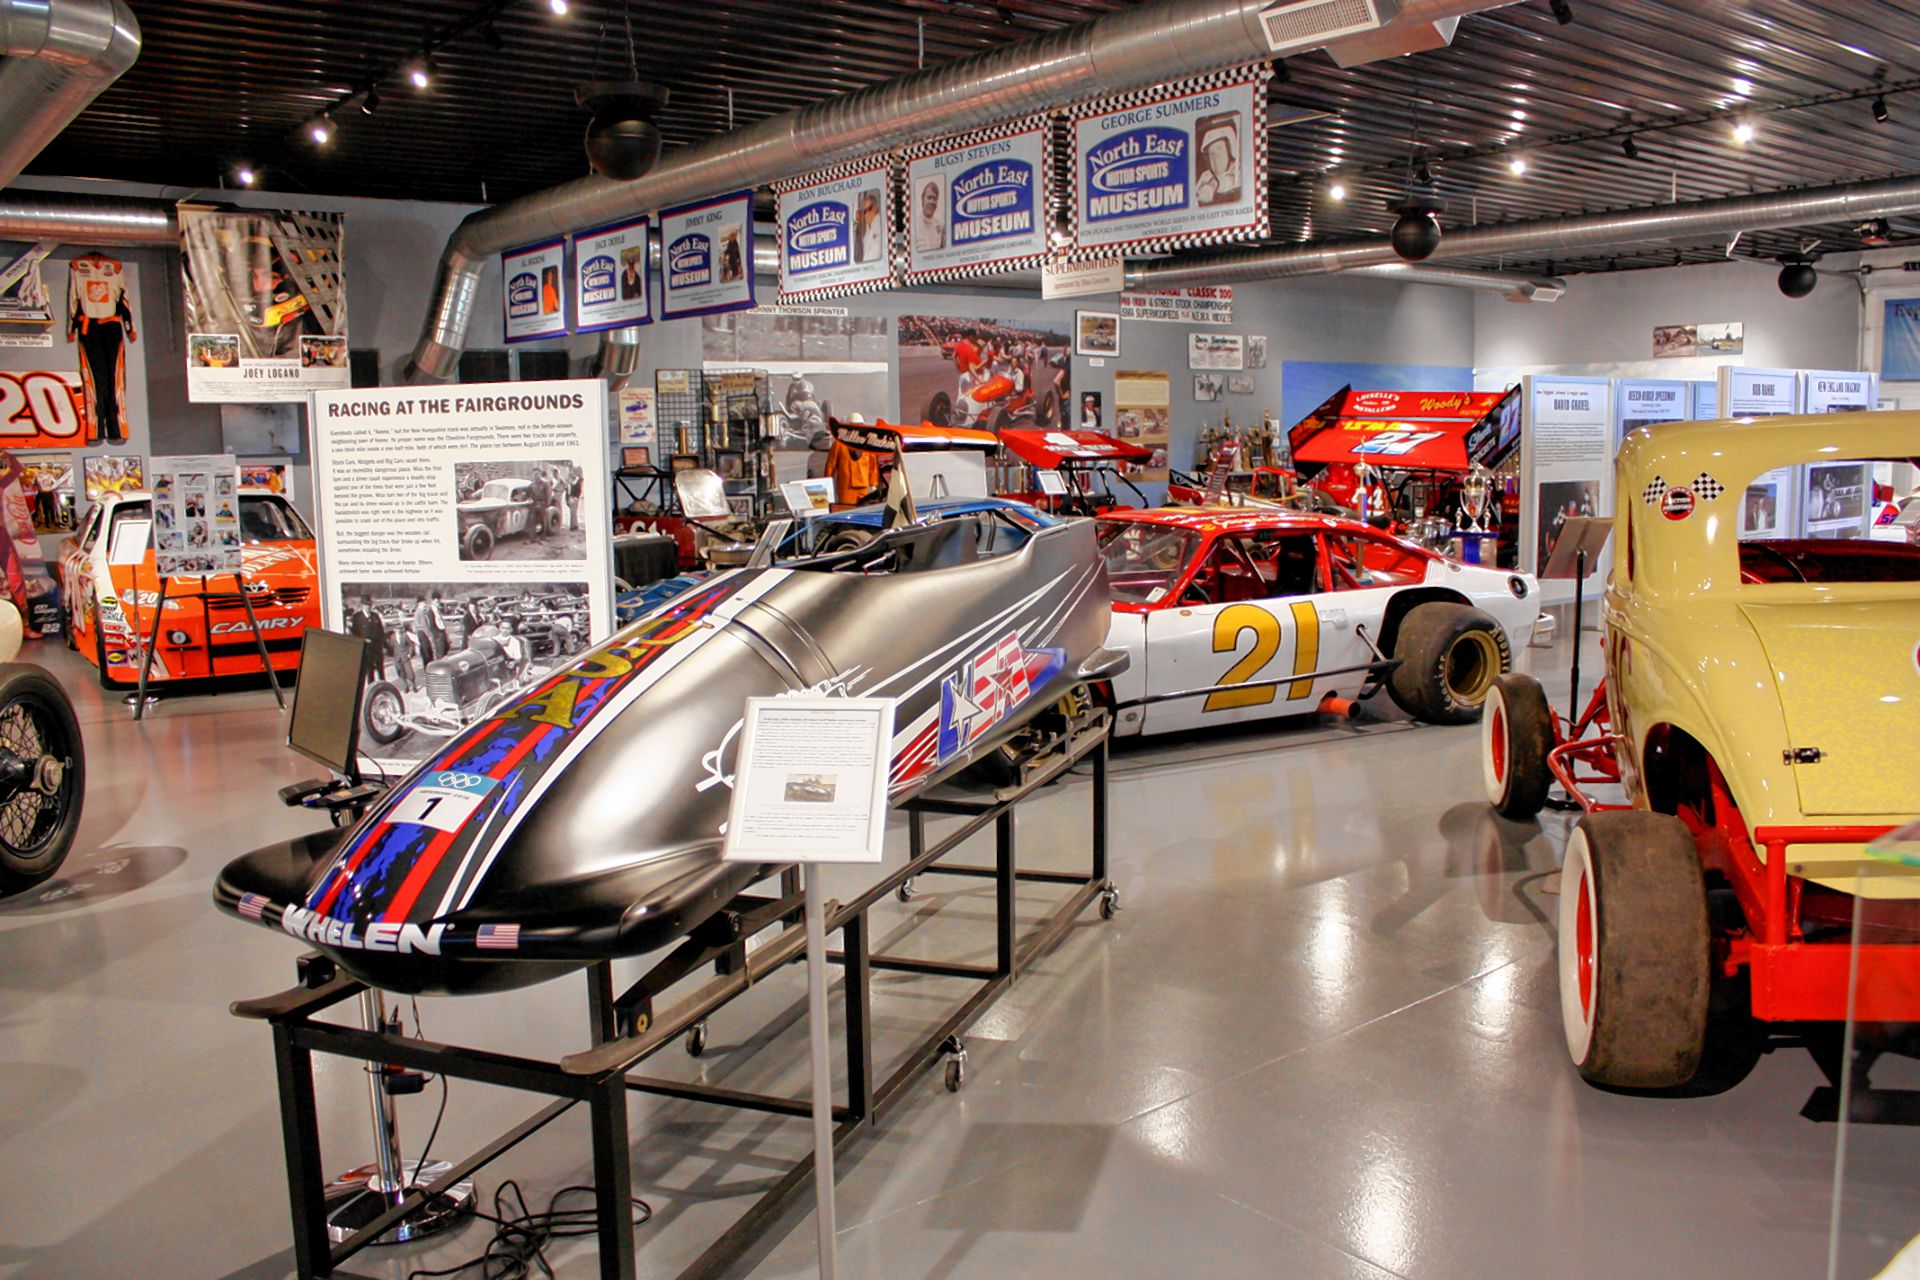 Get a glimpse of New England racing history at North East Motor Sports Museum - The Concord Insider